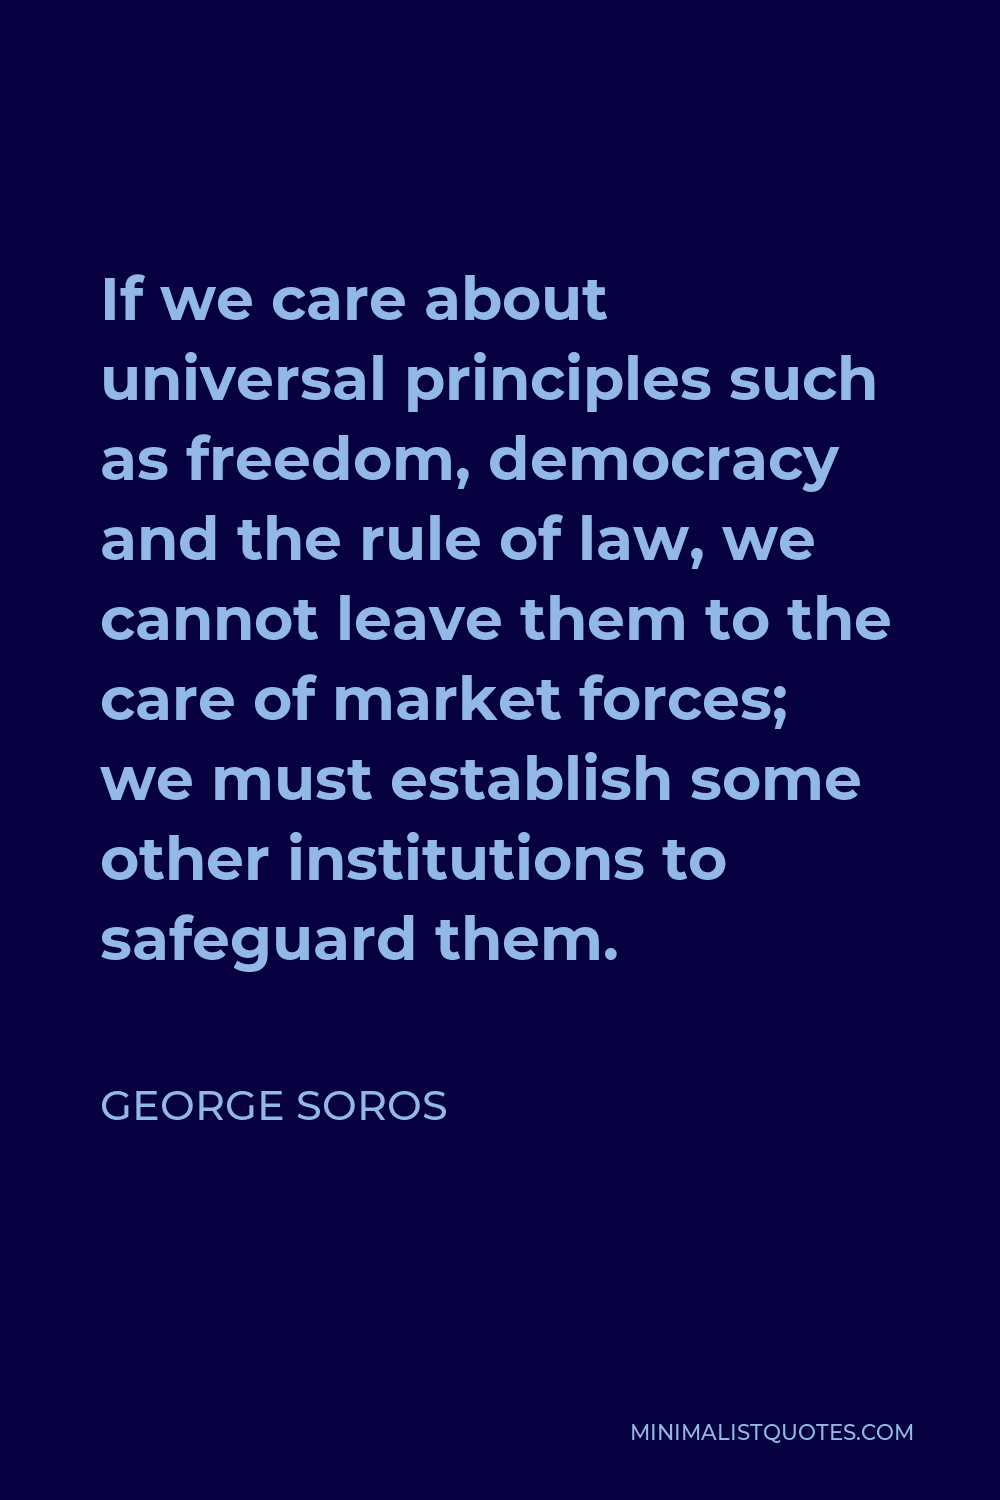 George Soros Quote - If we care about universal principles such as freedom, democracy and the rule of law, we cannot leave them to the care of market forces; we must establish some other institutions to safeguard them.